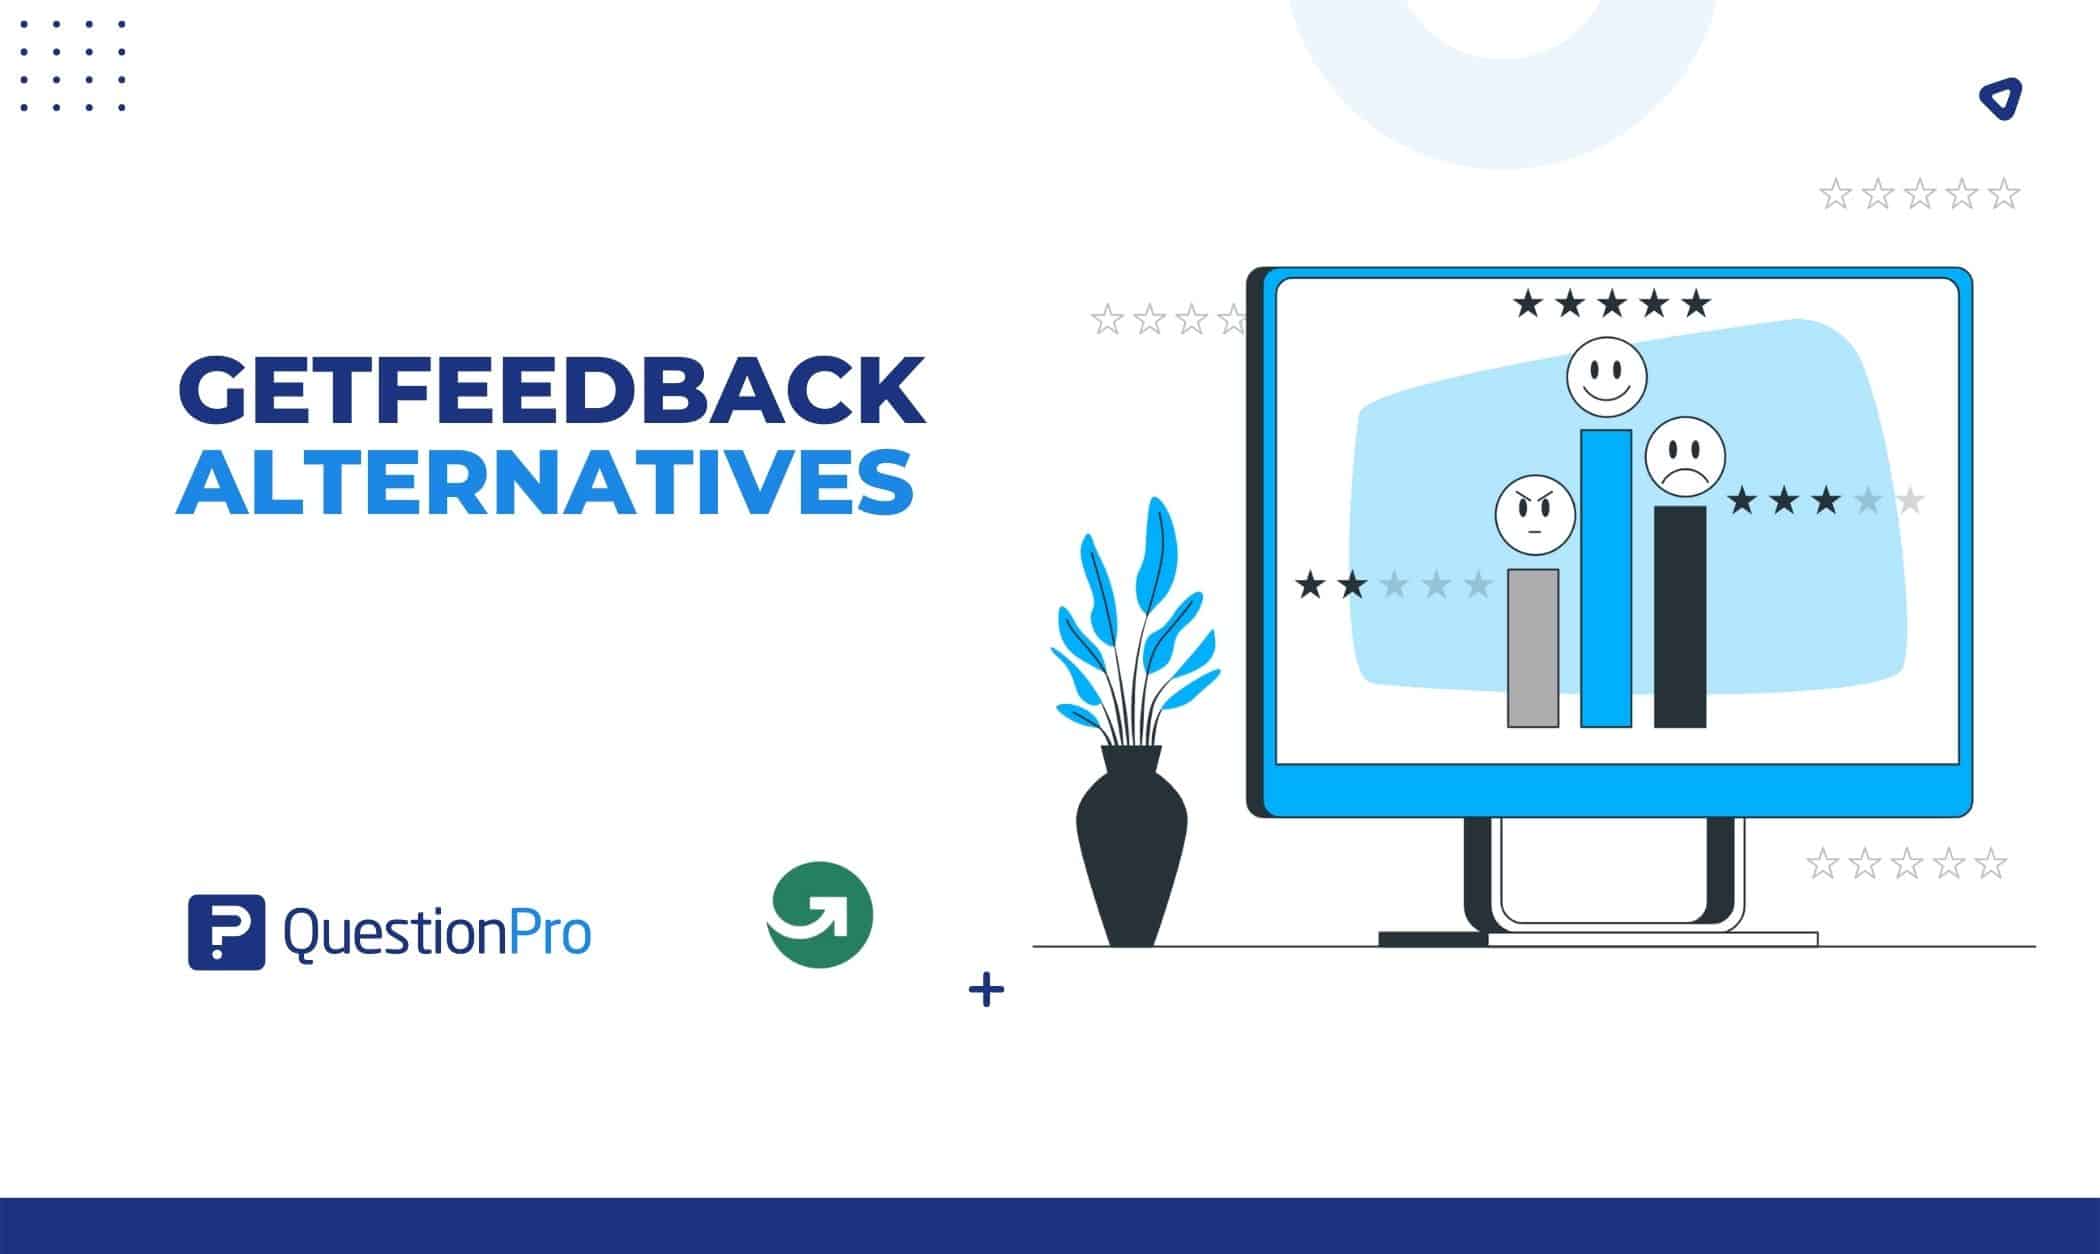 Find the best GetFeedback alternatives and competitors. Take a close look at these platforms to determine which is best for your needs.